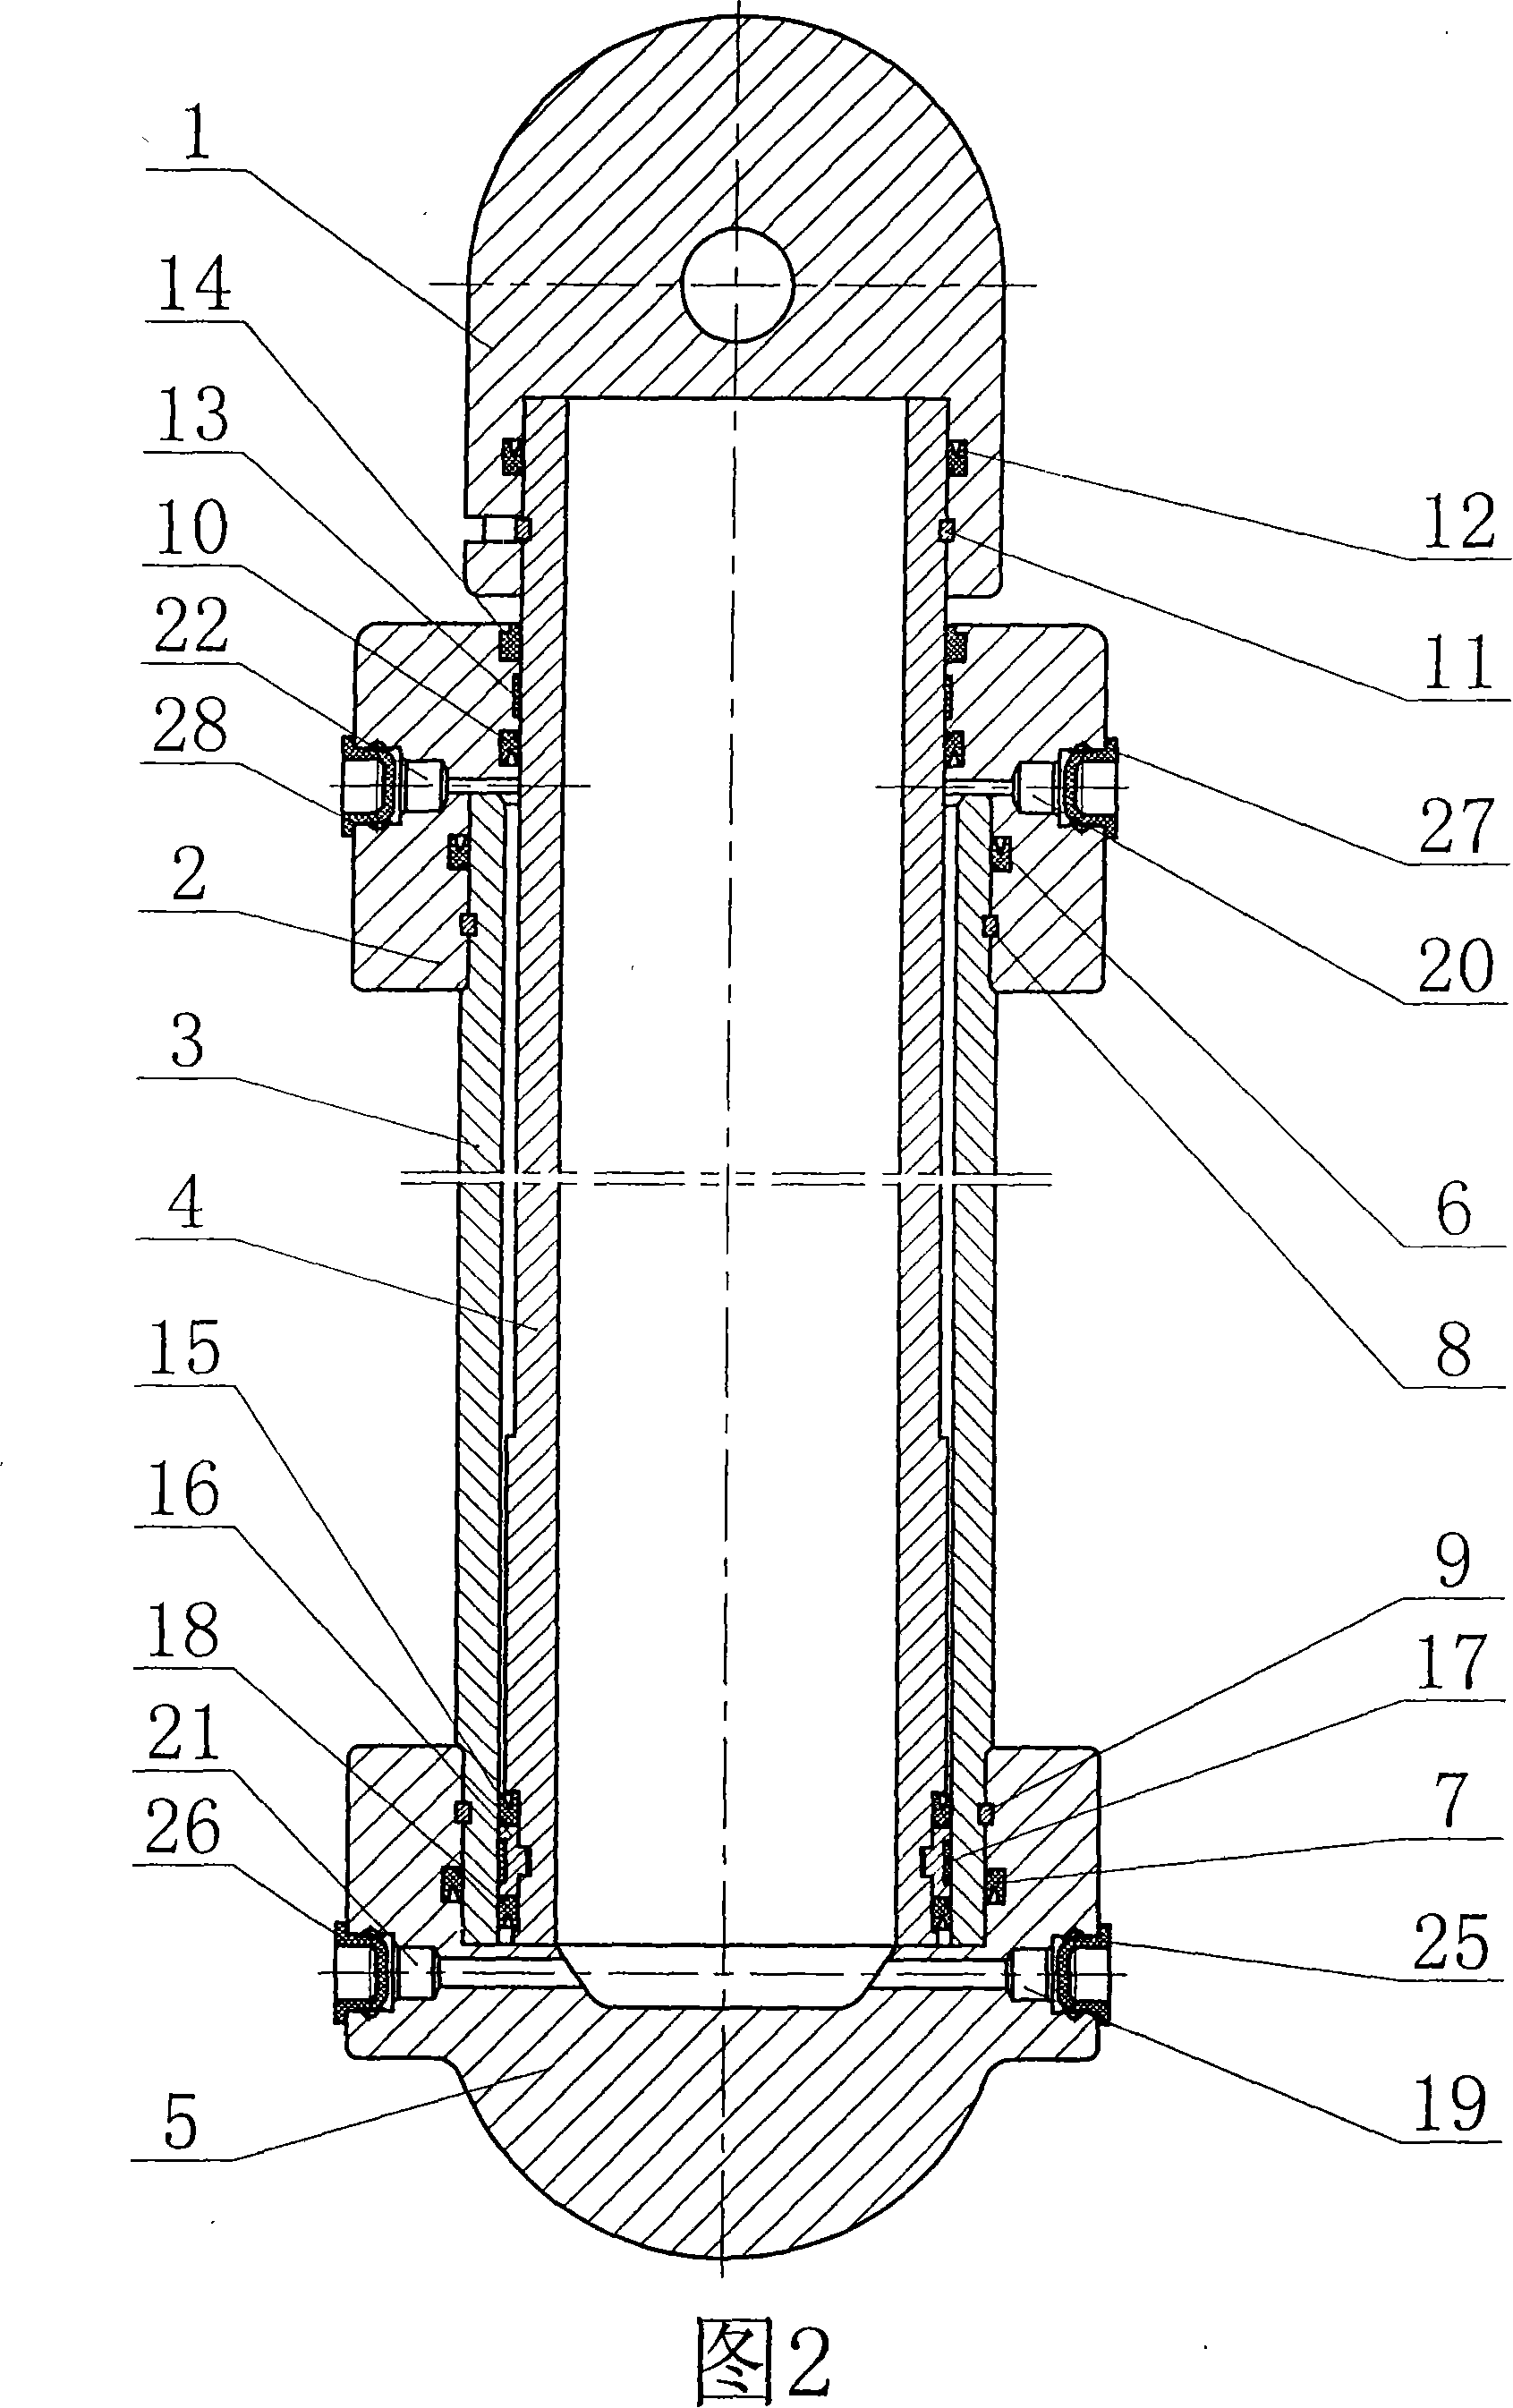 Single extension suspended type hydraulic vertical prop